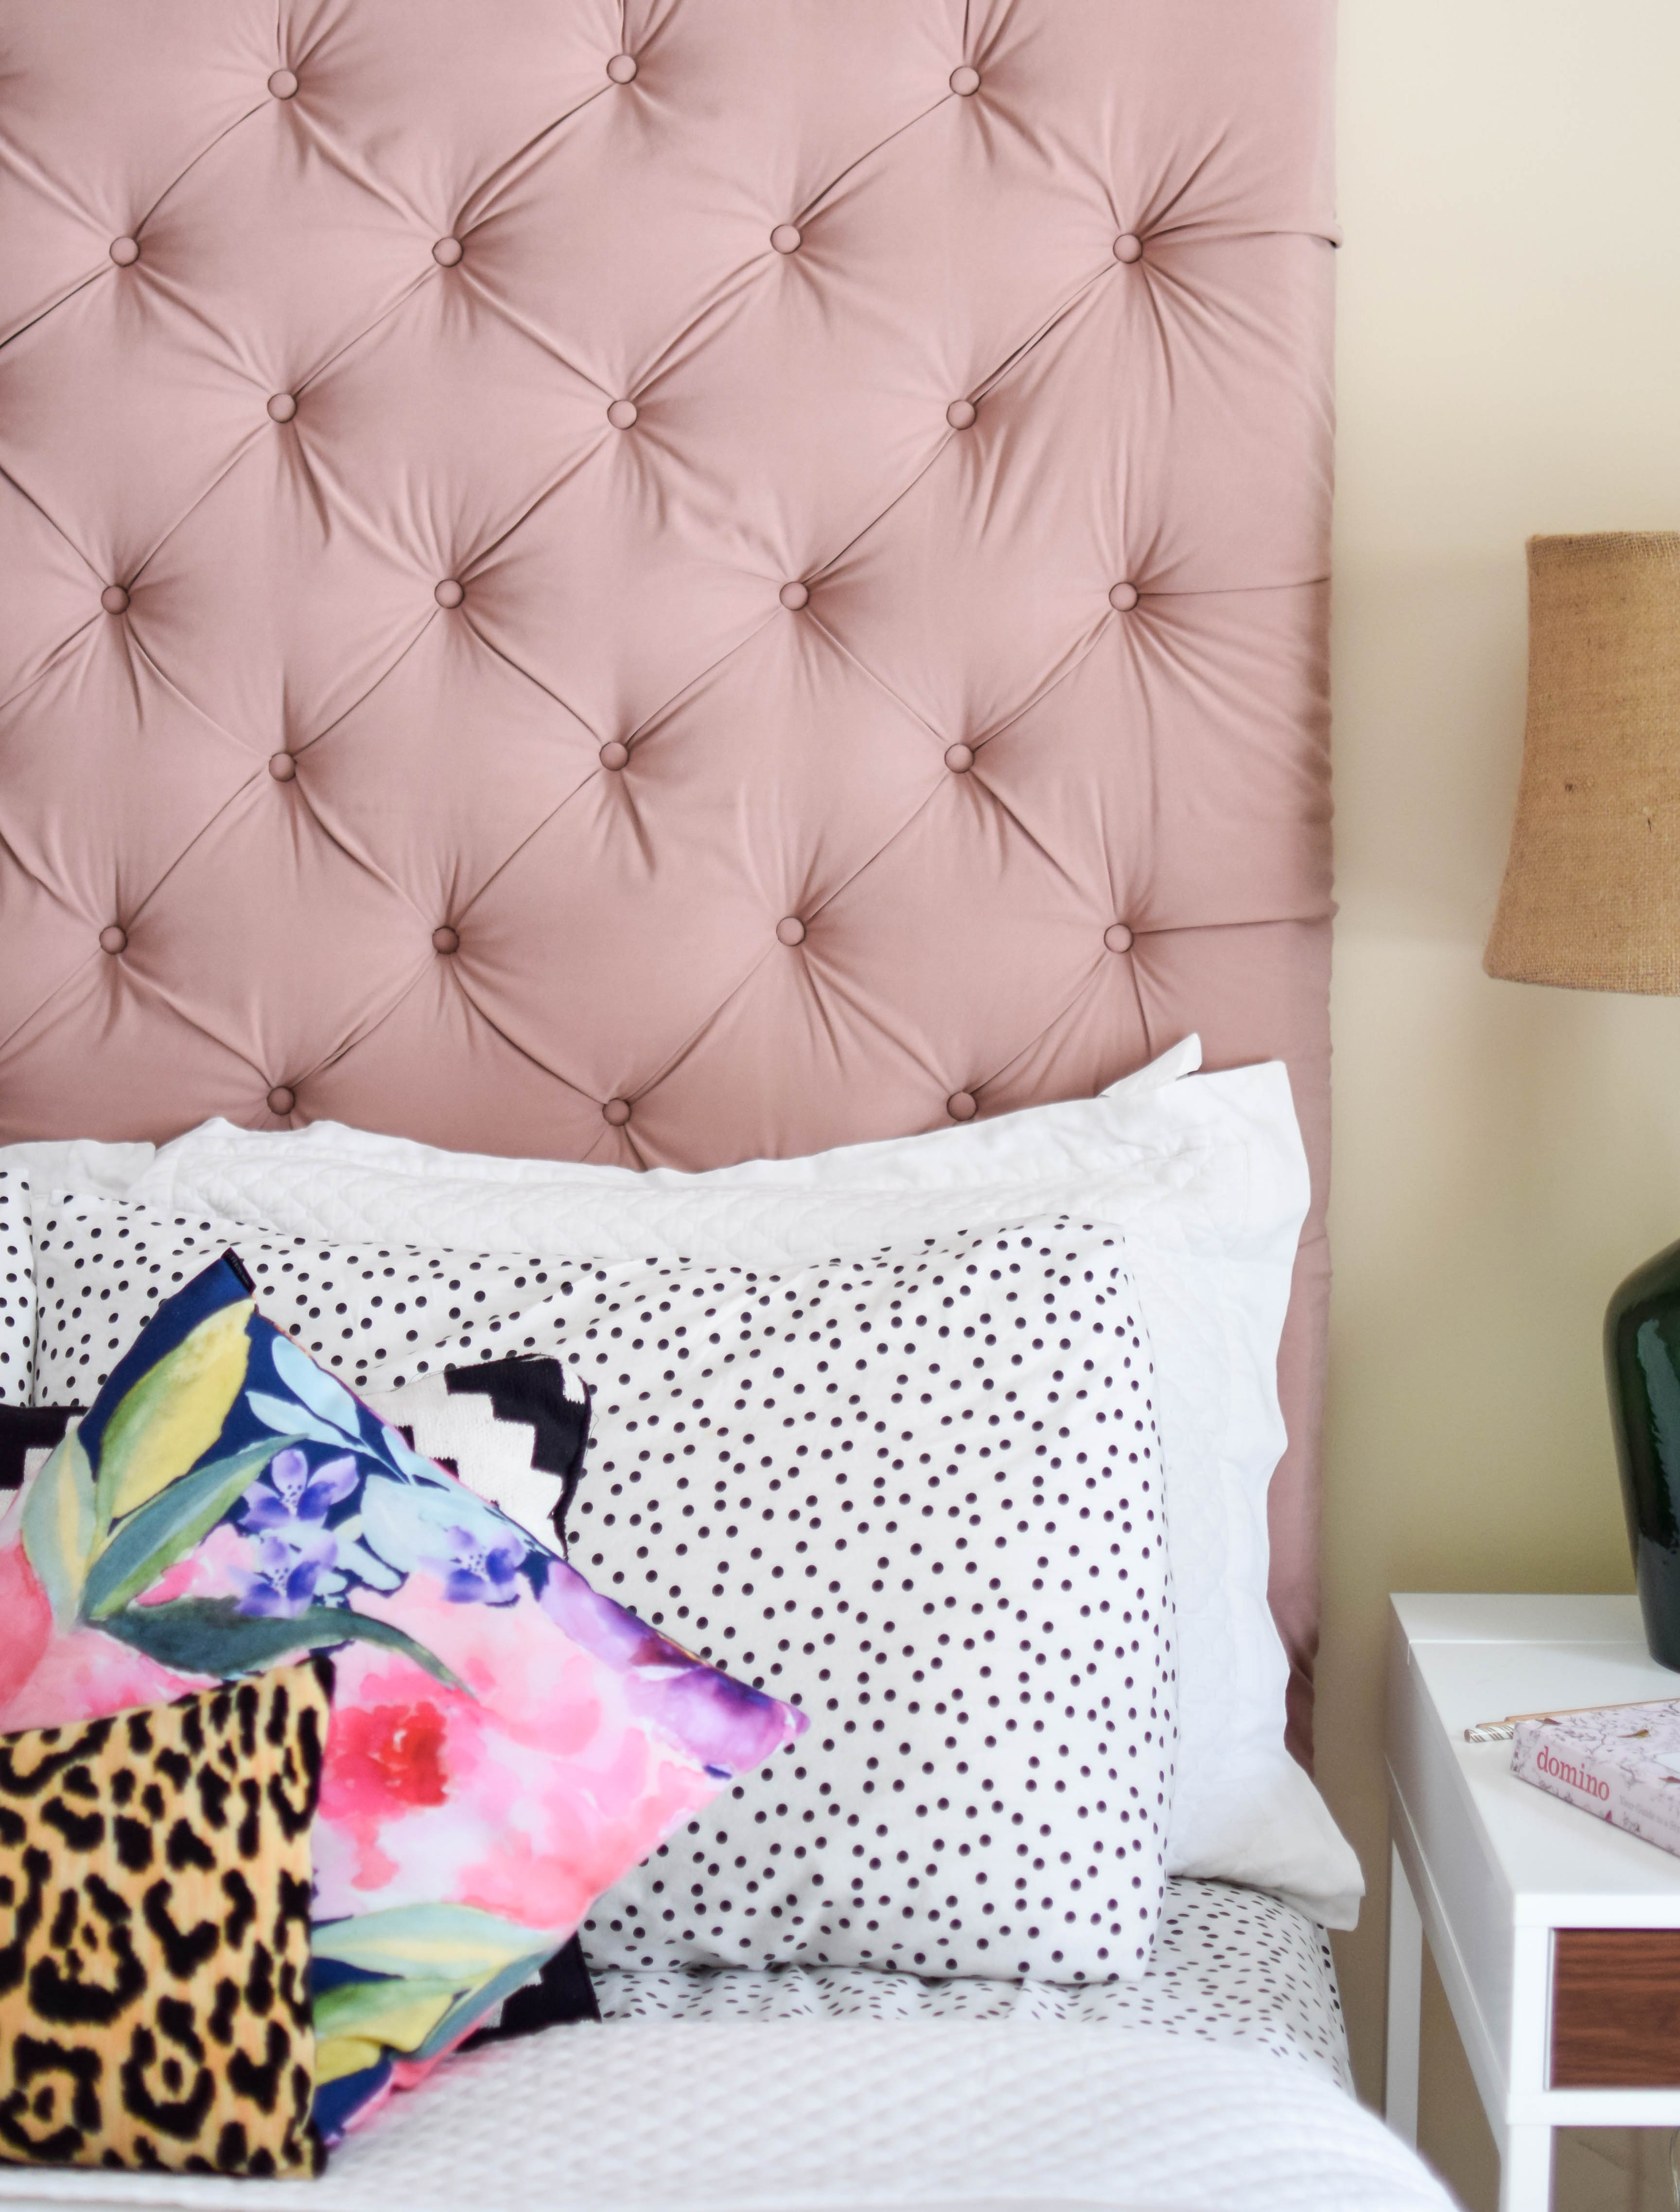 Diy Tufted Headboard Over Sized, How To Make A Padded Headboard For King Size Bed